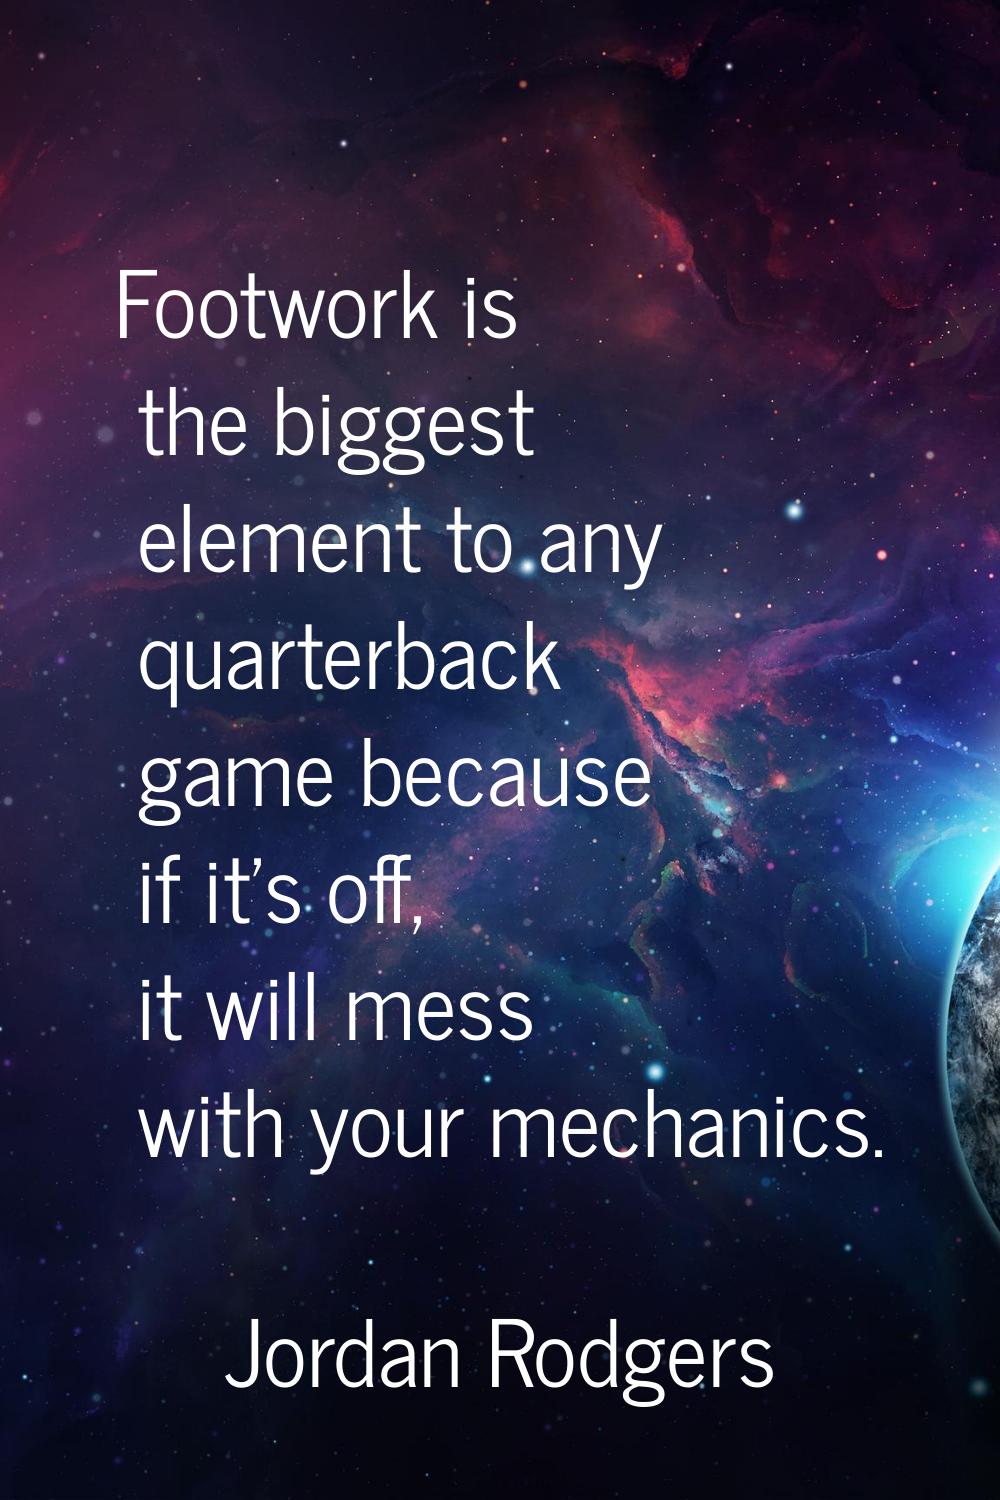 Footwork is the biggest element to any quarterback game because if it's off, it will mess with your